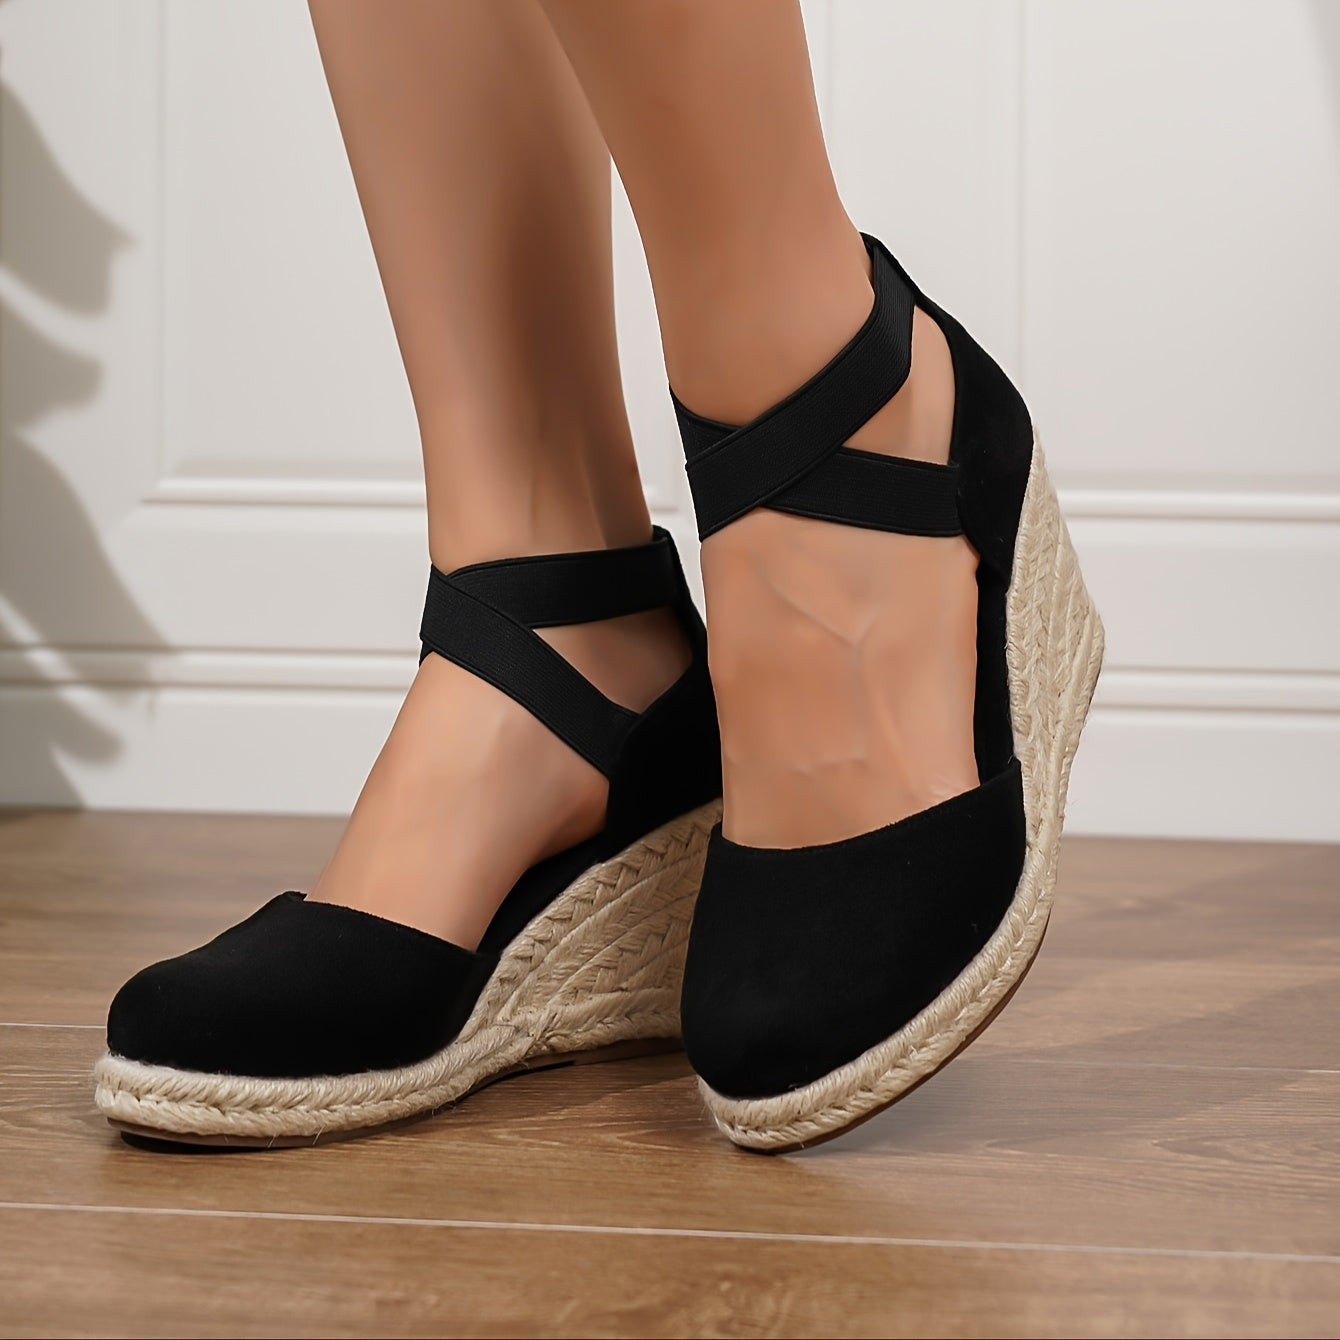 xieyinshe  Women's Wedge Heeled Sandals, Casual Elastic Band Summer Shoes, Comfortable Espadrille Sandals